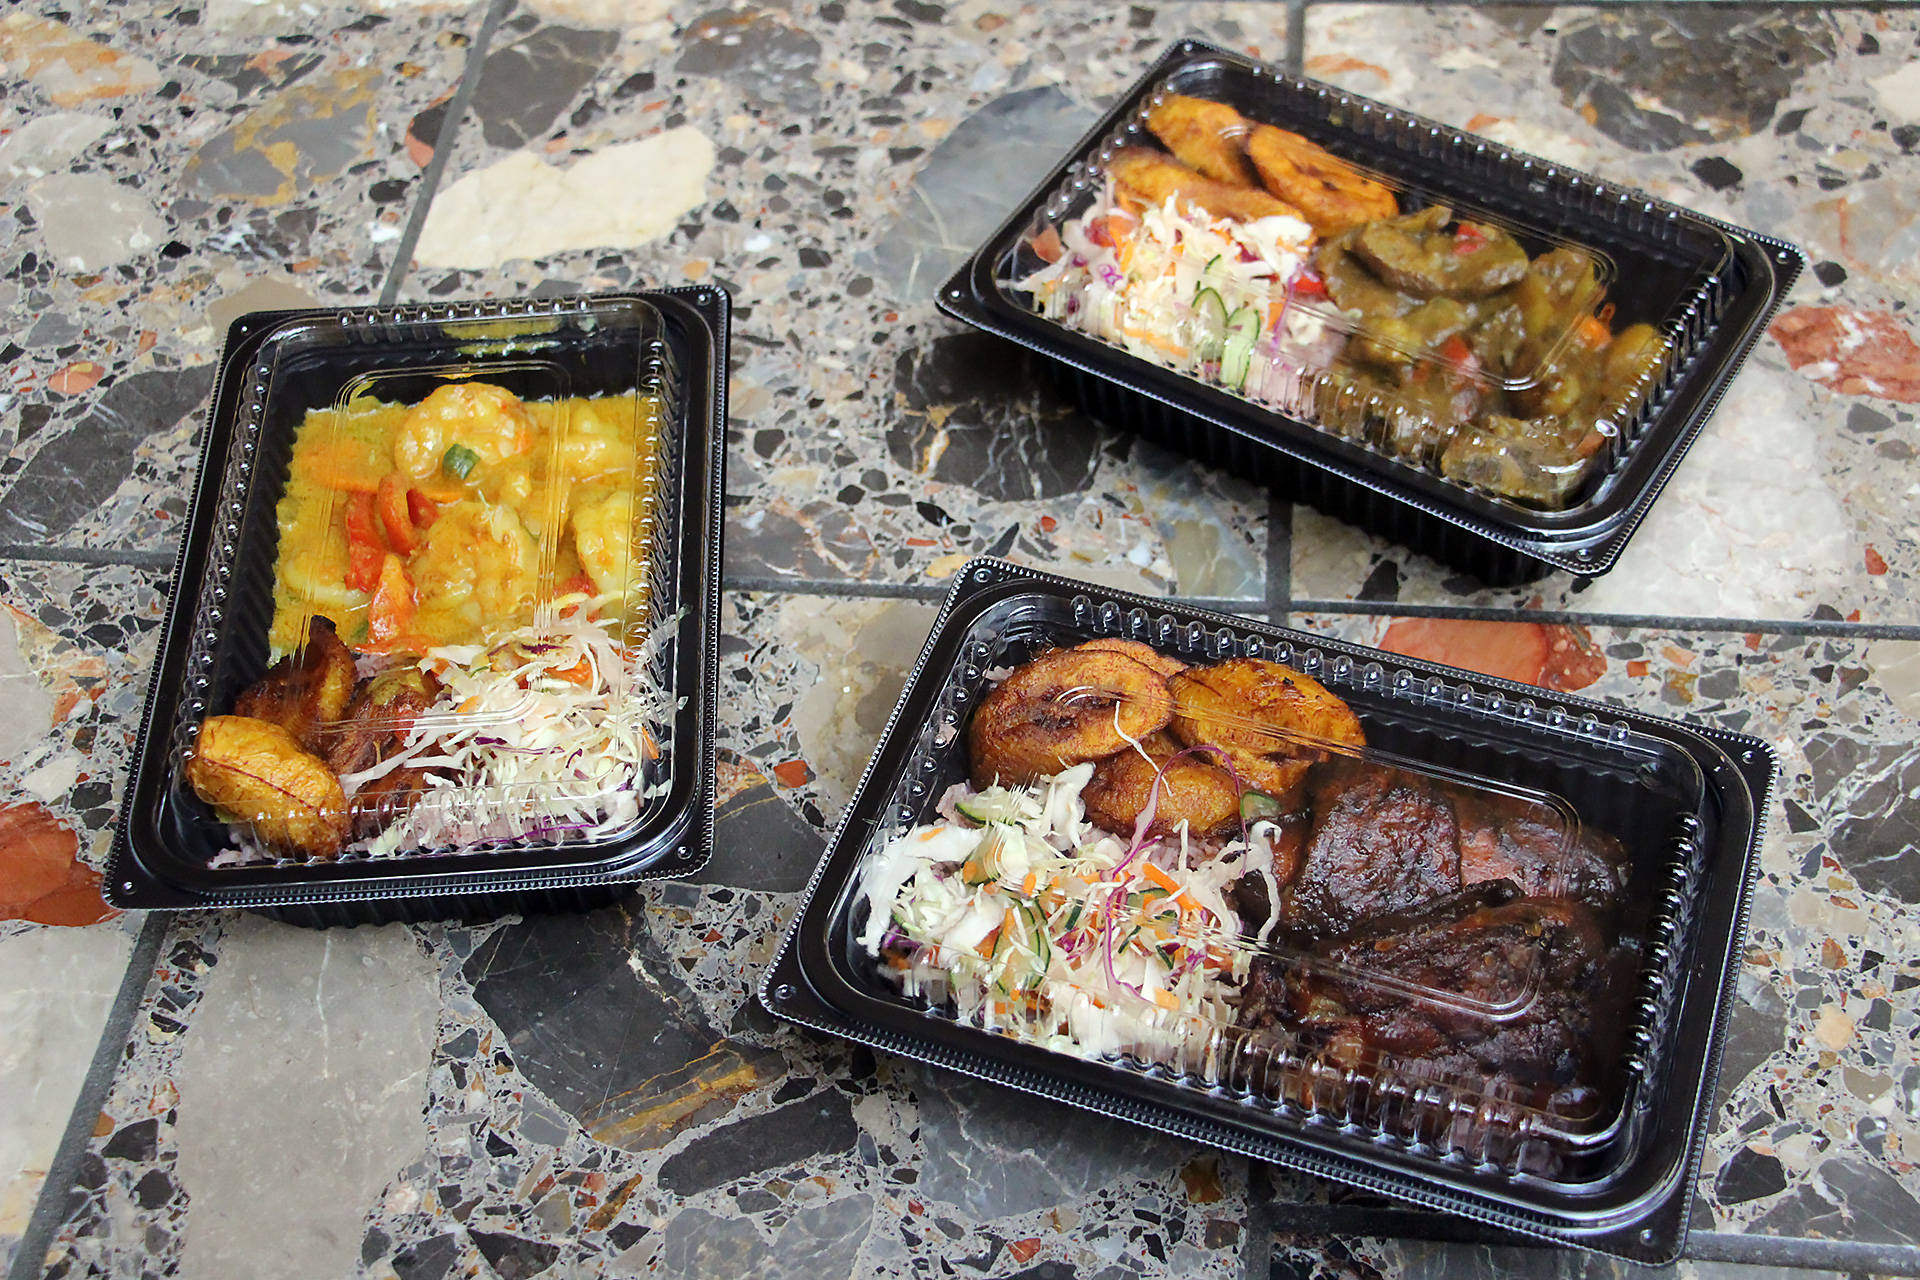 Curry Shrimp, Curry Goat and Jerk Chicken from  Scotch Bonnet. Wendy Goodfriend